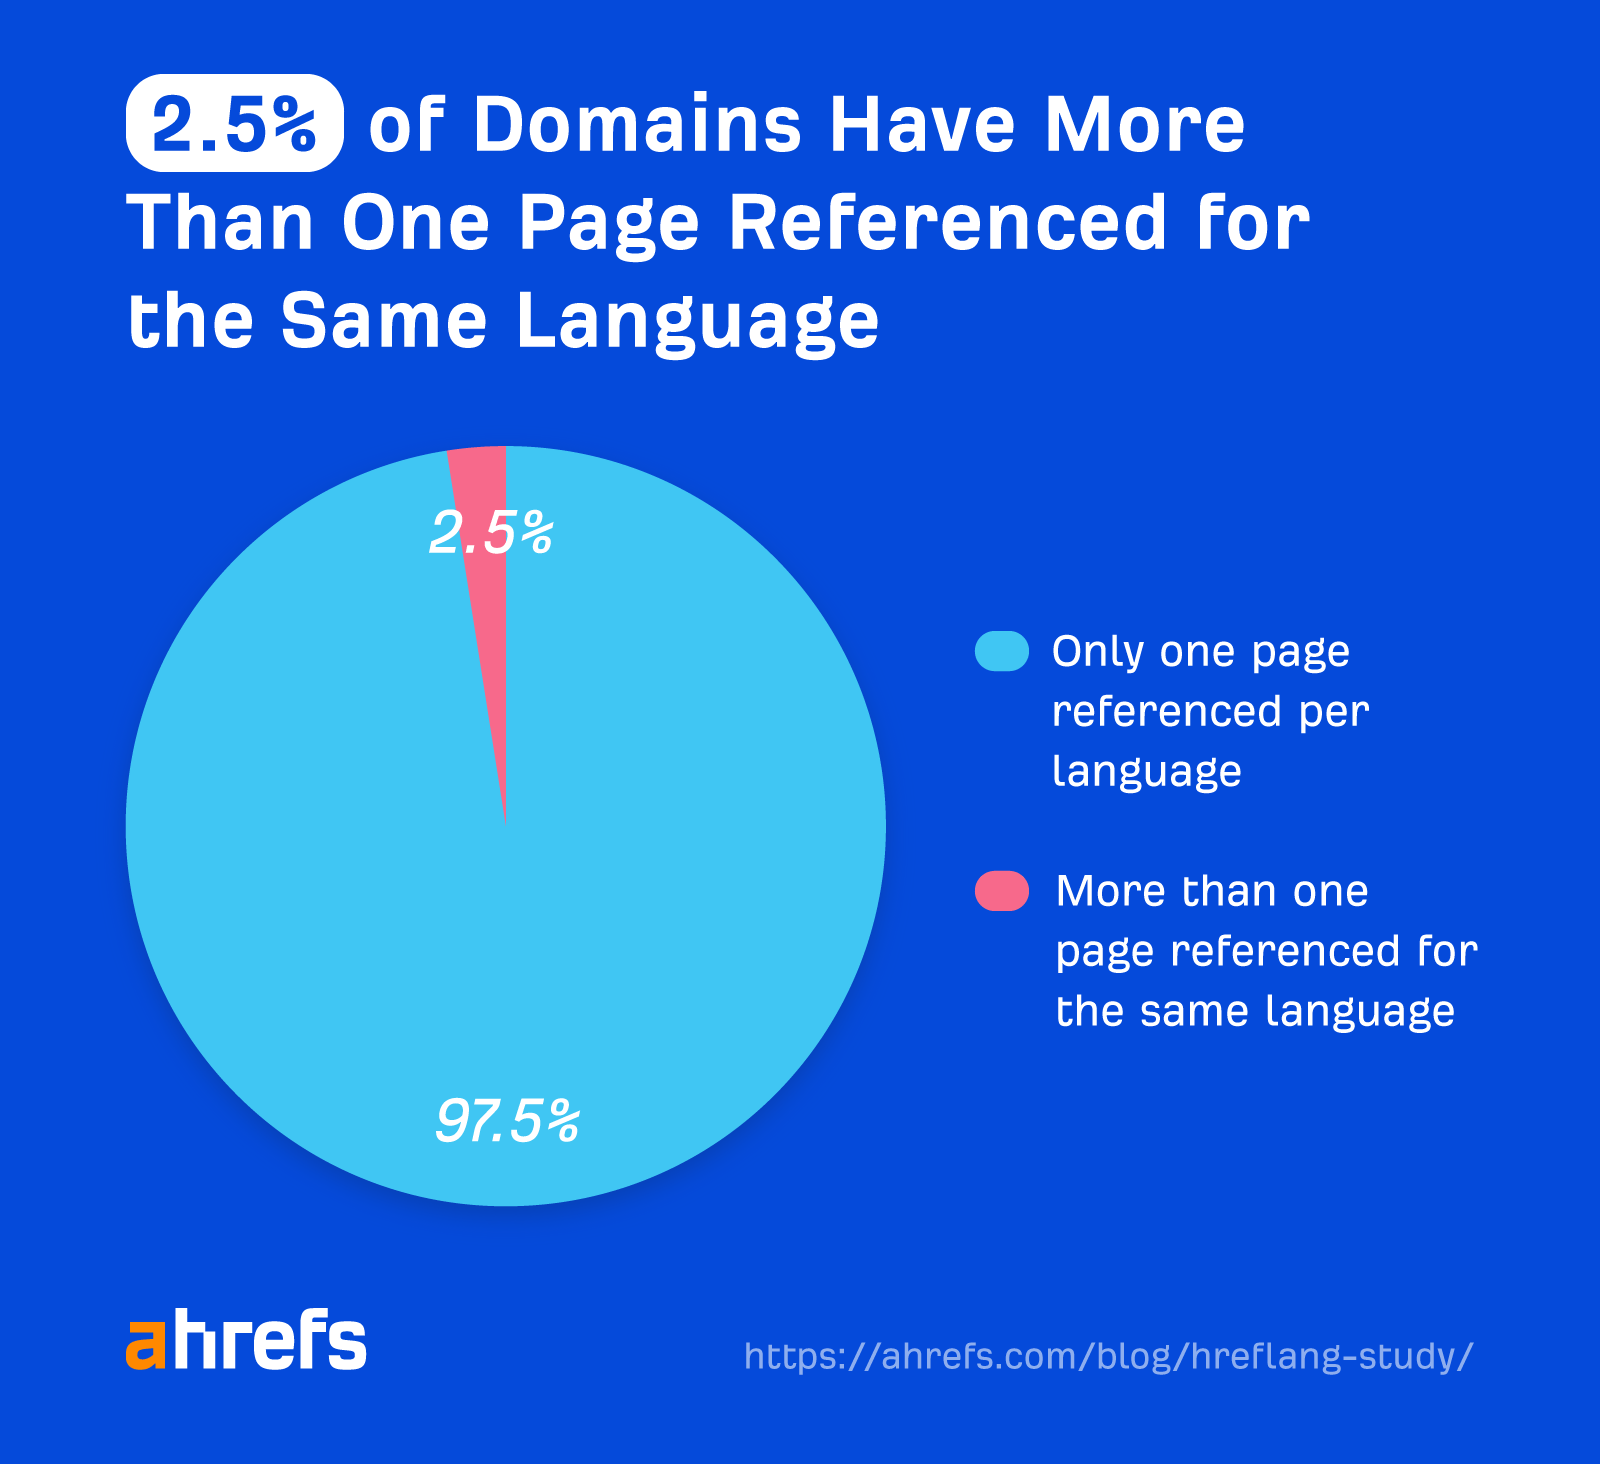 2.5% of domains have more than one page referenced for the same language